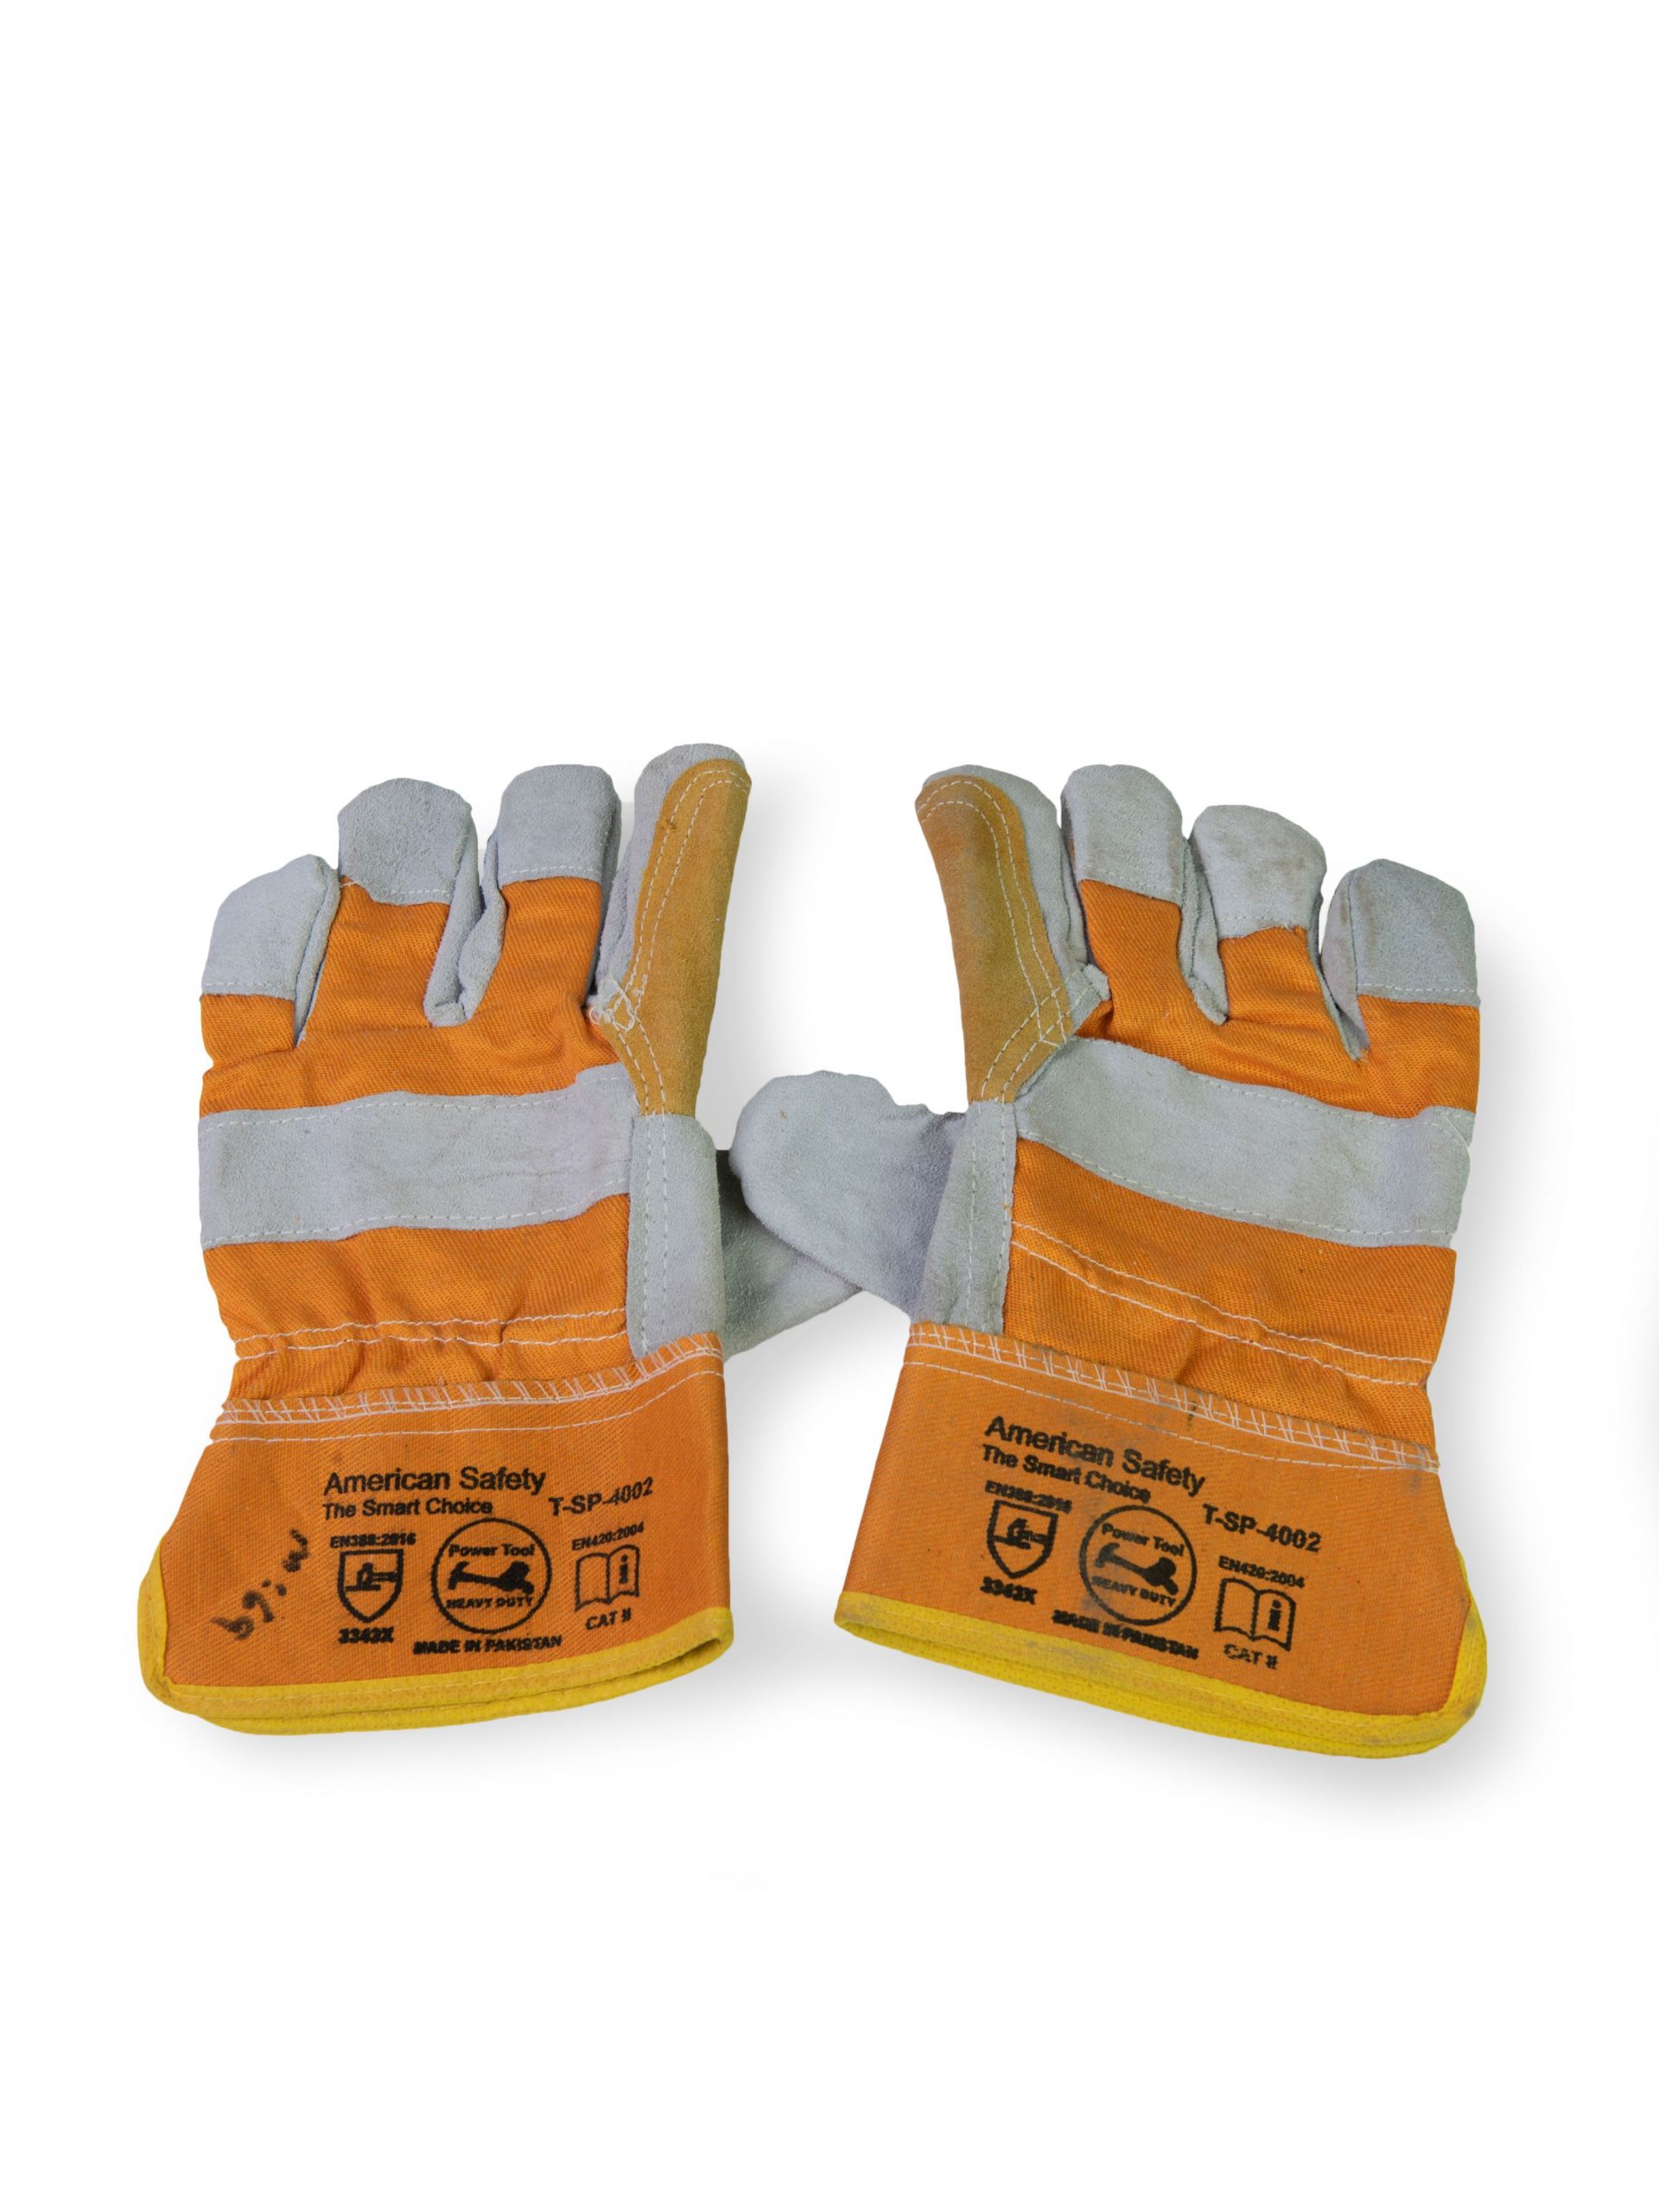 LEATHER HAND GLOVES YELLOW COLOR